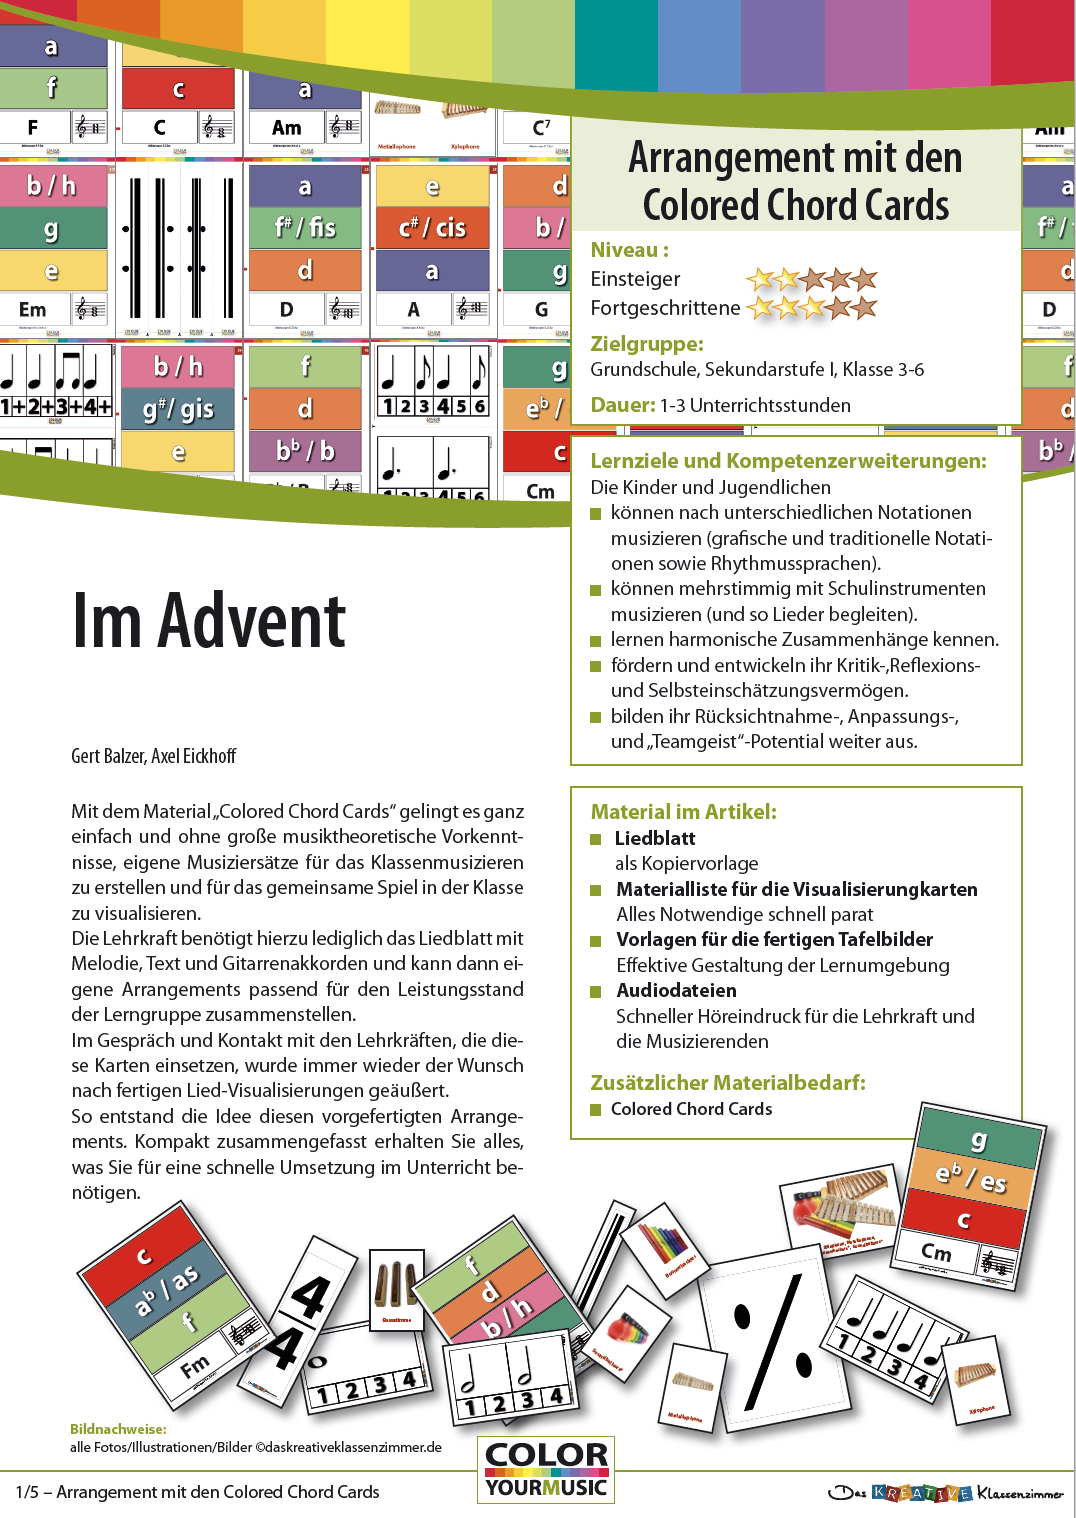 Im Advent - Colored Chord Cards